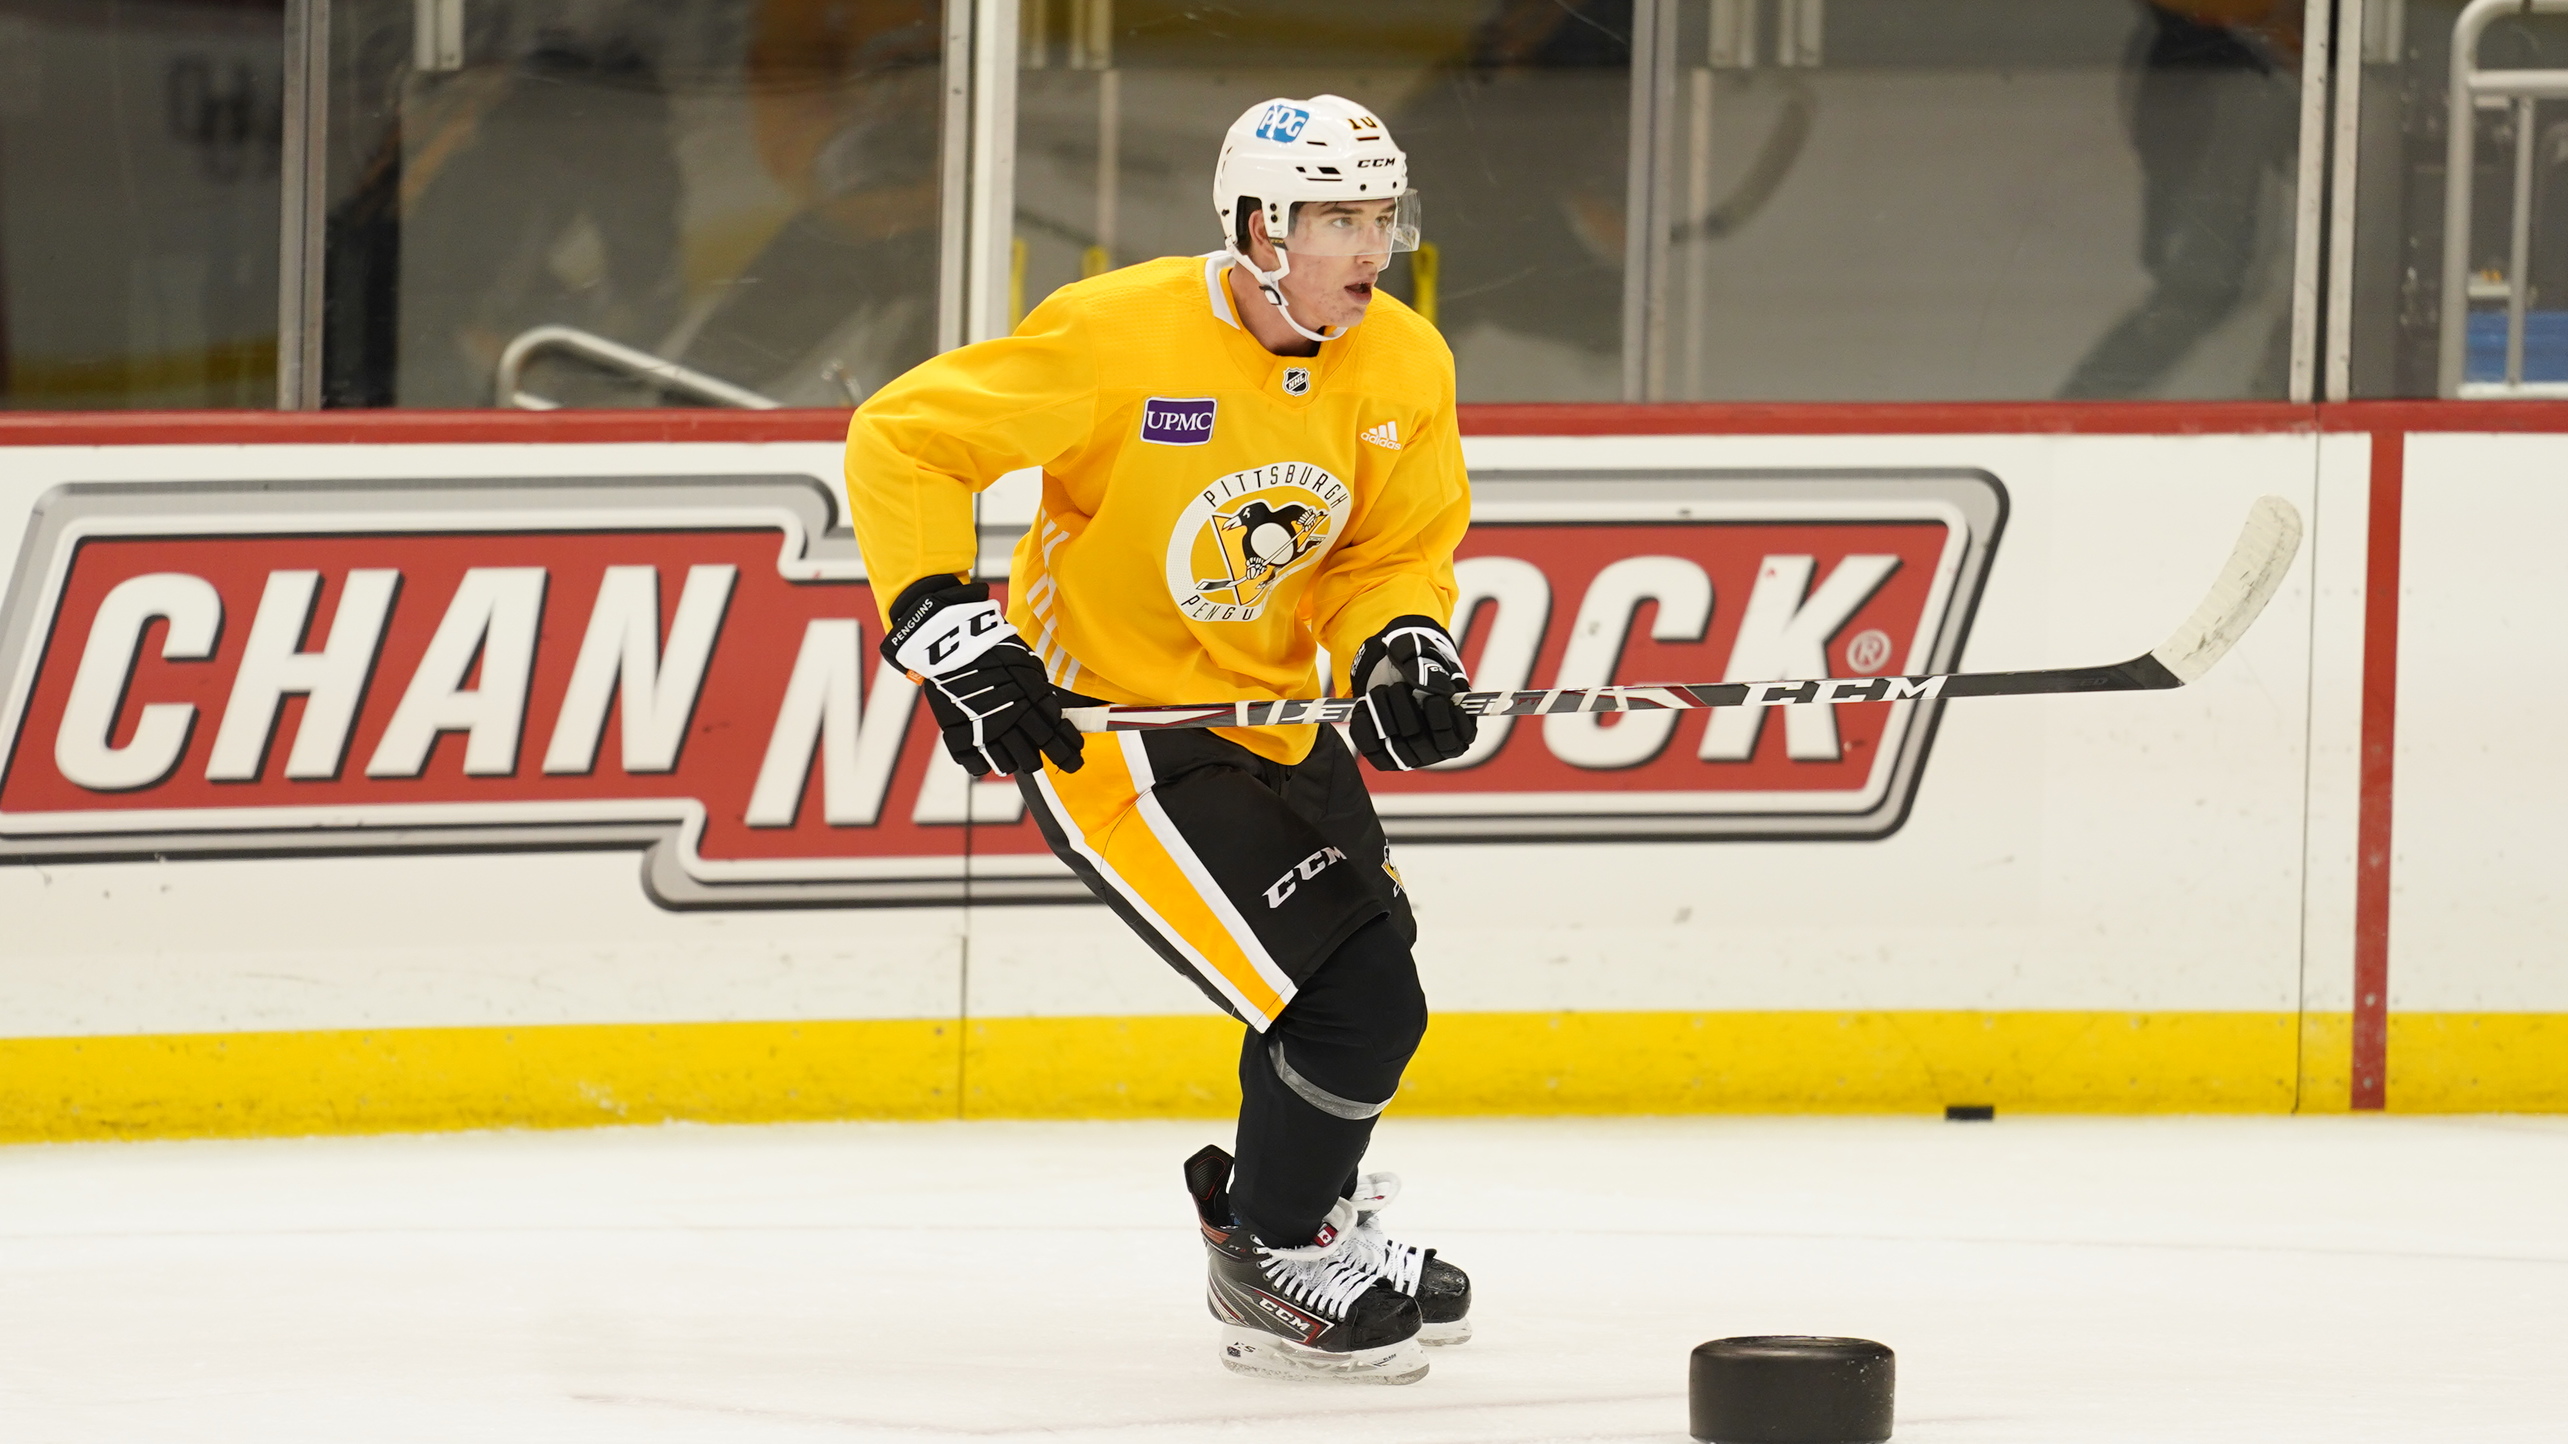 Penguins: Video breakdown of what Drew O'Connor brings to the table